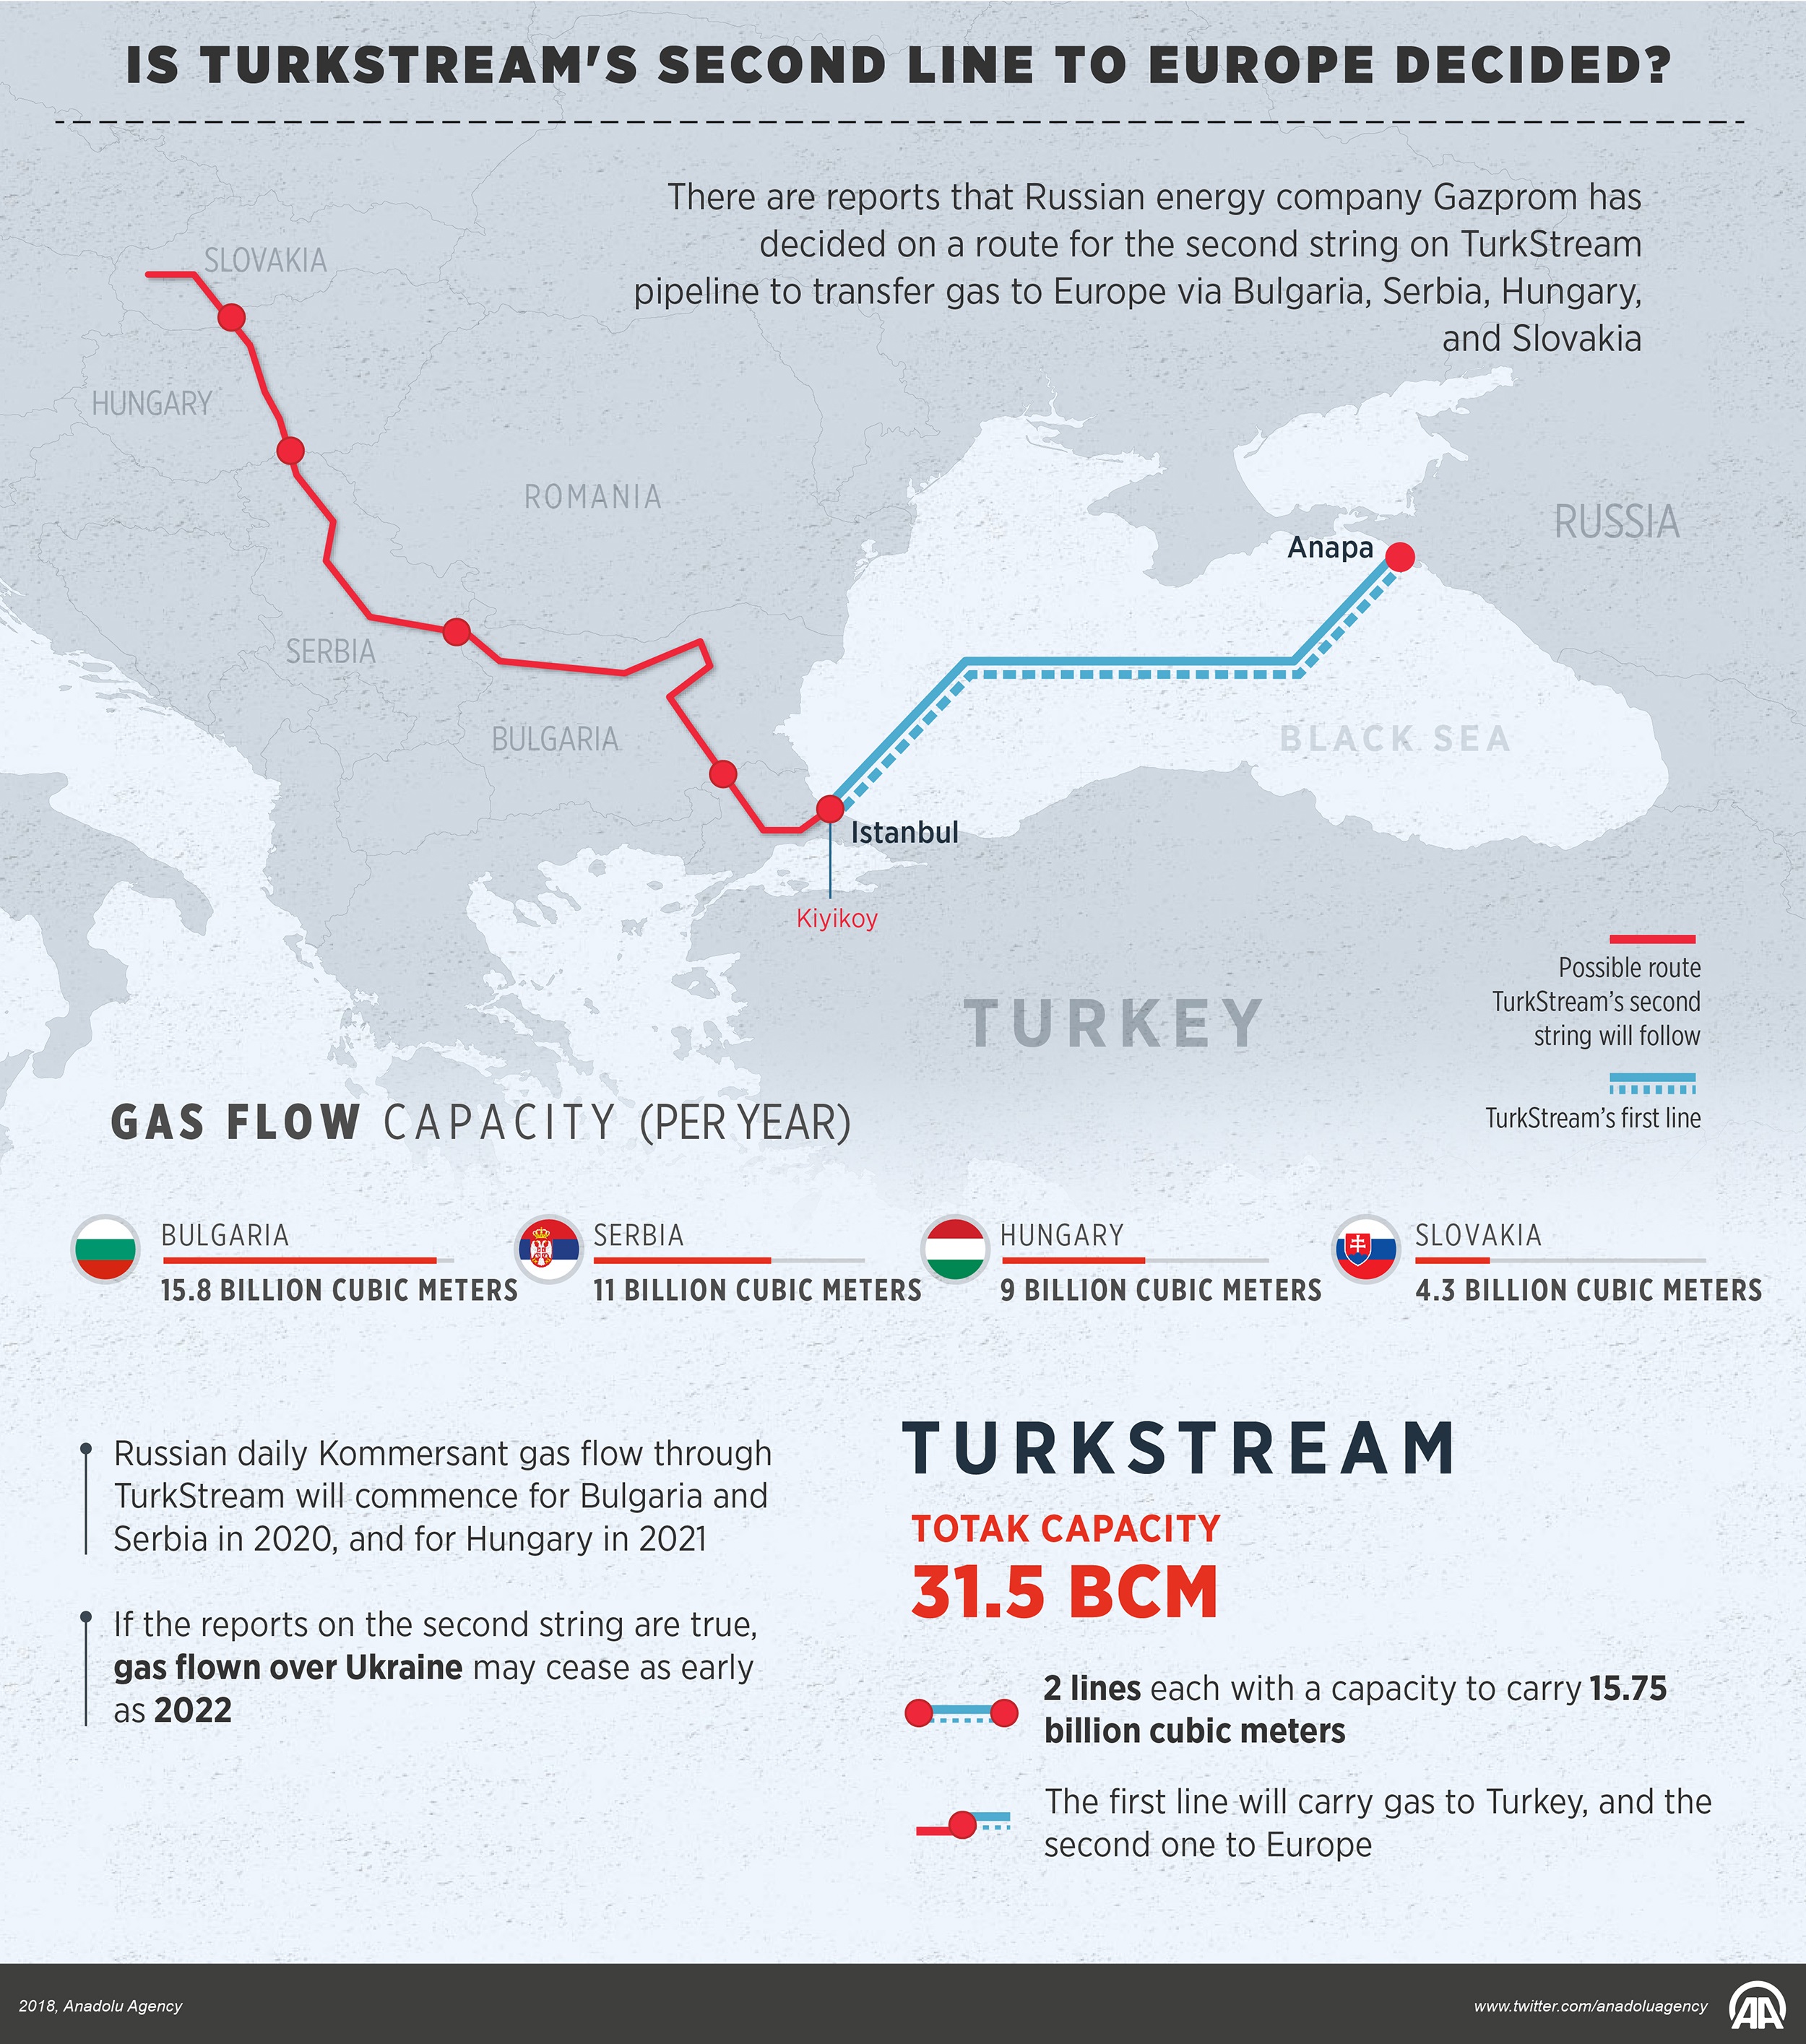 Is Turkstream's second line to Europe Decided?